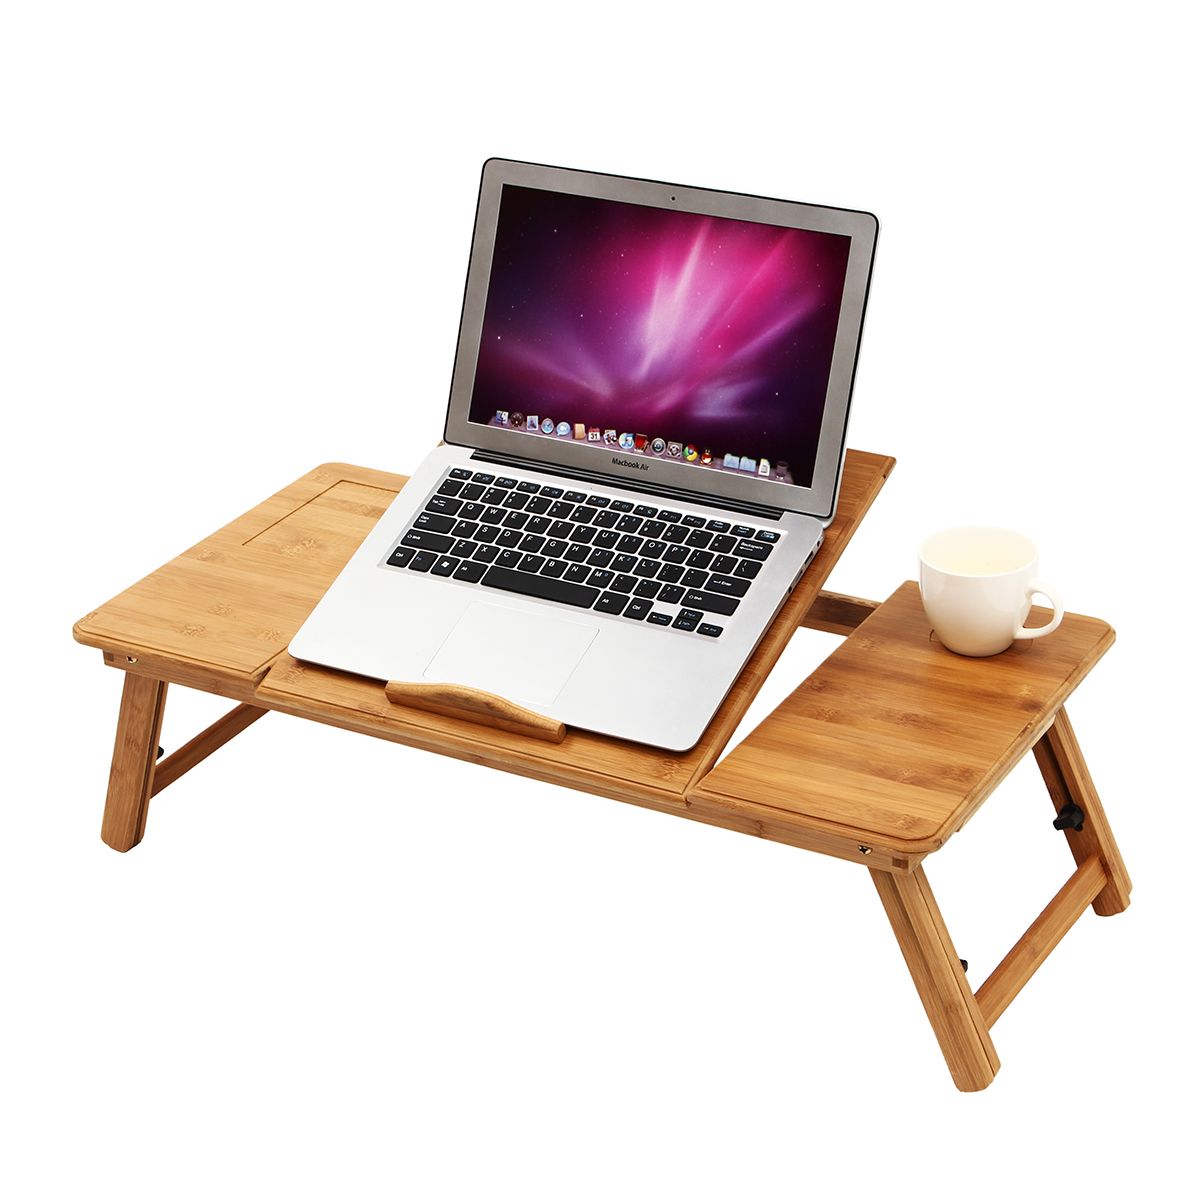 50X30x4cm-Adjustable-Foldable-Laptop-PC-Desk-Portable-Bamboo-Bed-Notebook-Table-Holder-1598903